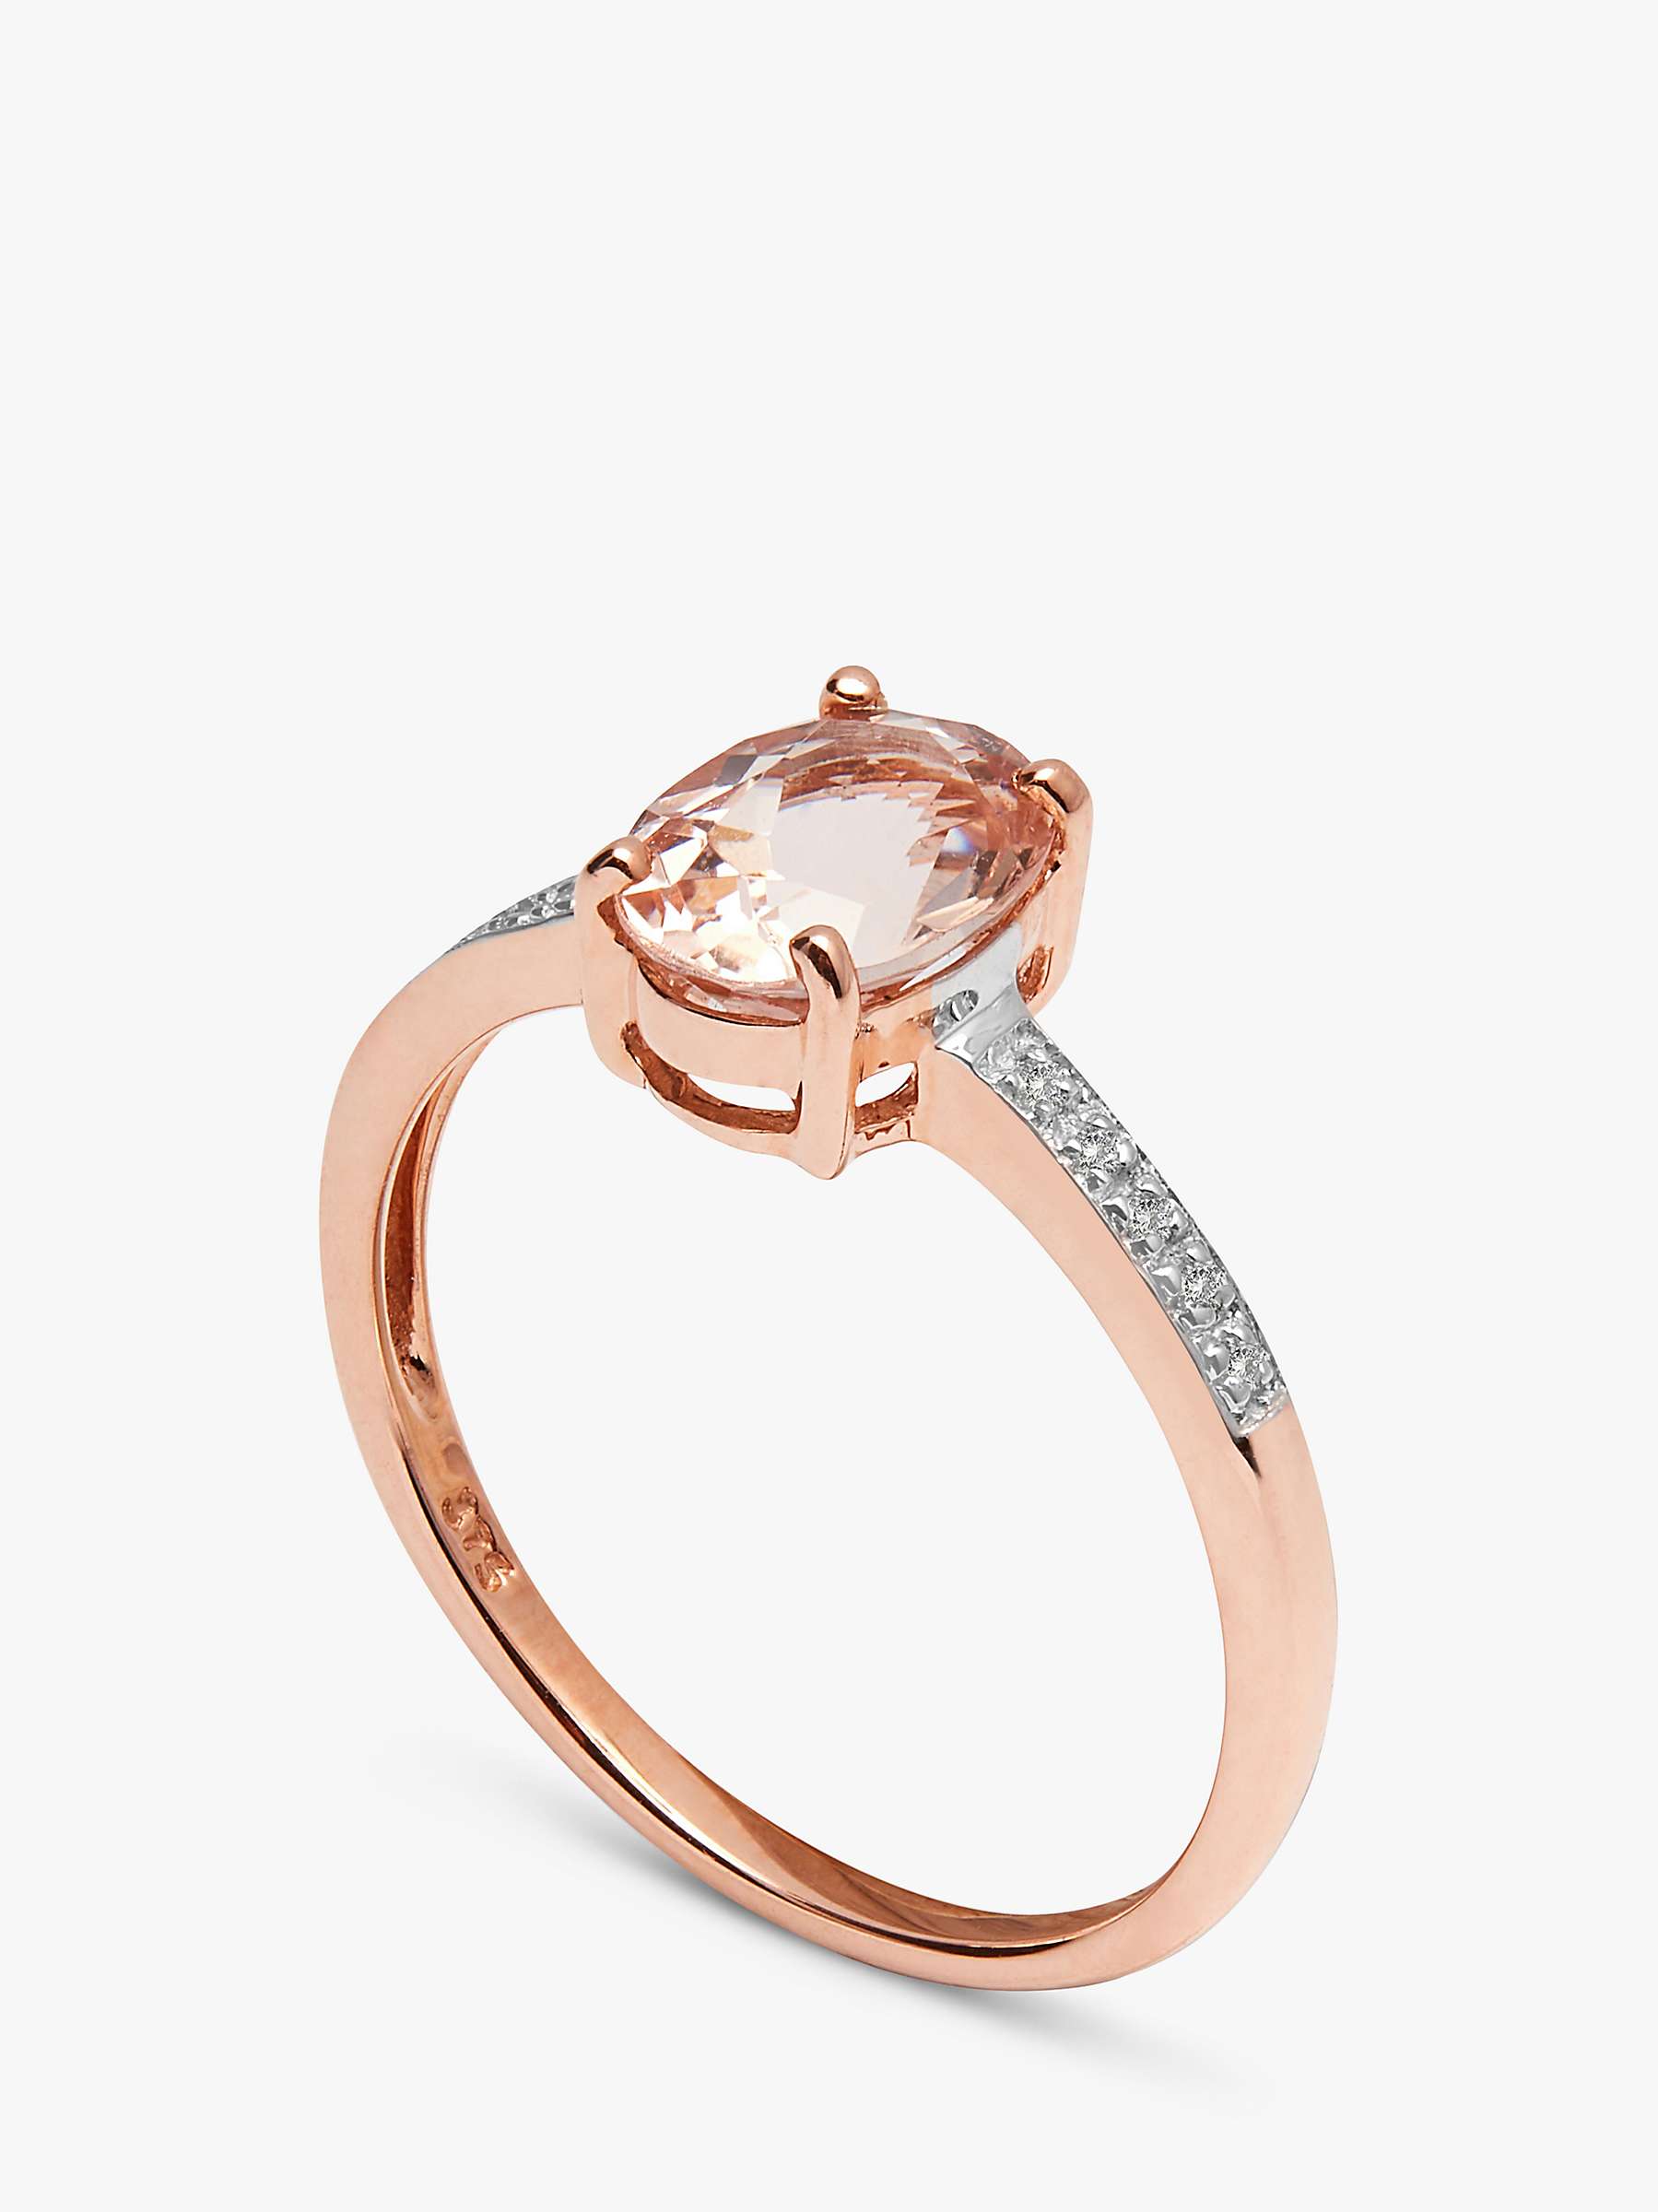 Buy A B Davis 9ct Rose Gold Oval Morganite and Diamond Engagement Ring Online at johnlewis.com